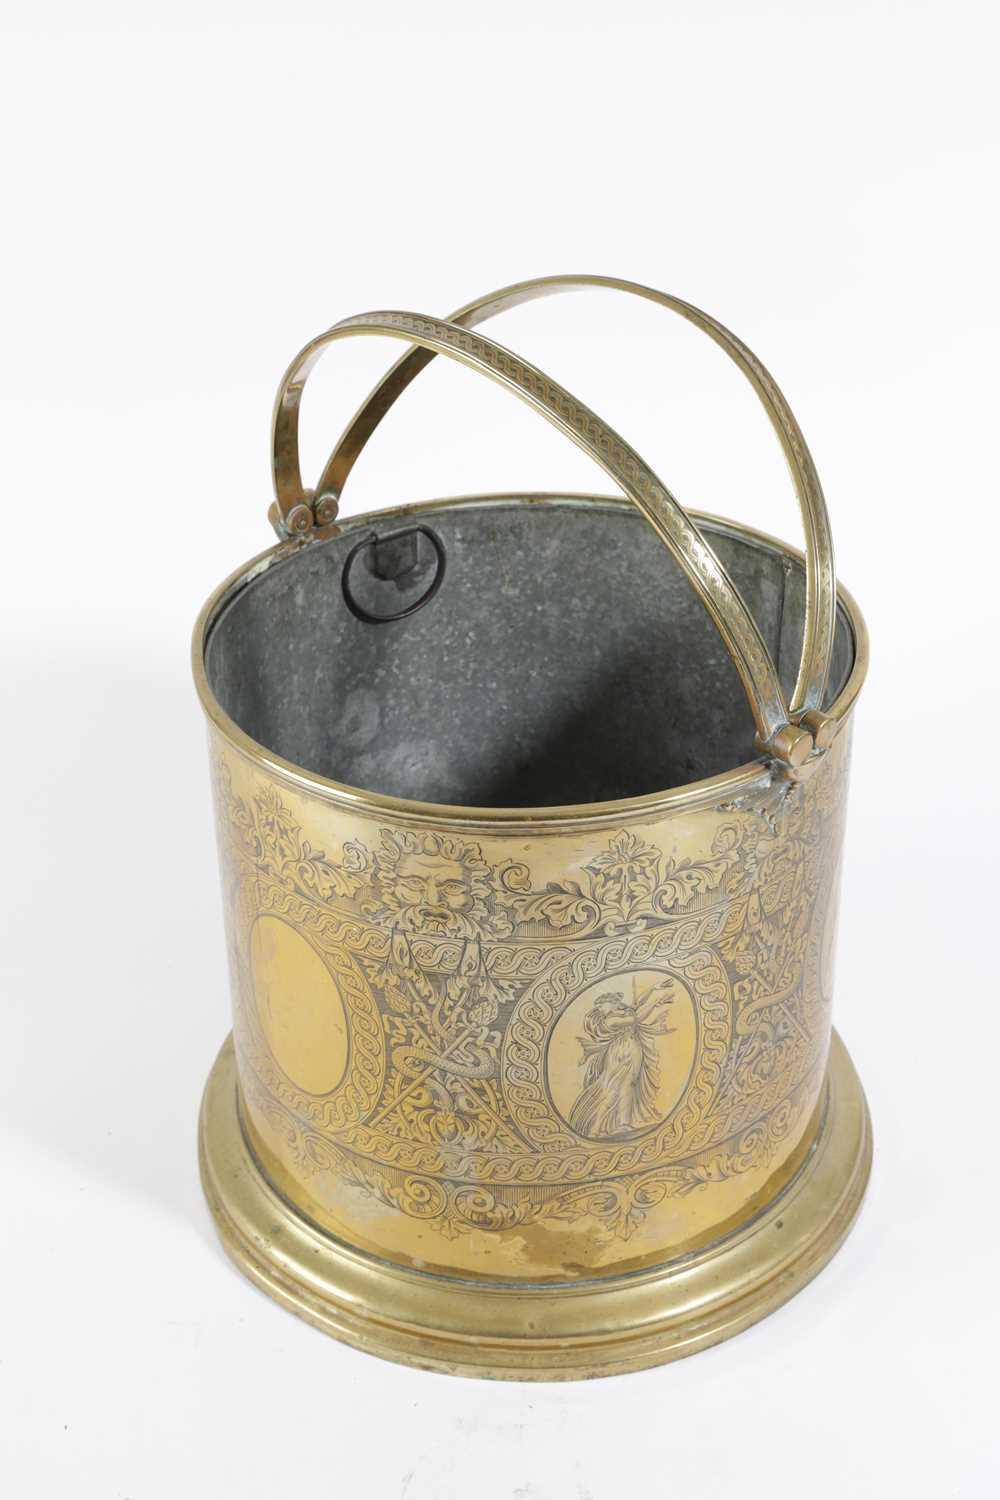 A FINE BRASS TWIN-HANDLED ICE BUCKET DUTCH OR ITALIAN, 19TH CENTURY of cylindrical form, the pair of - Image 2 of 2